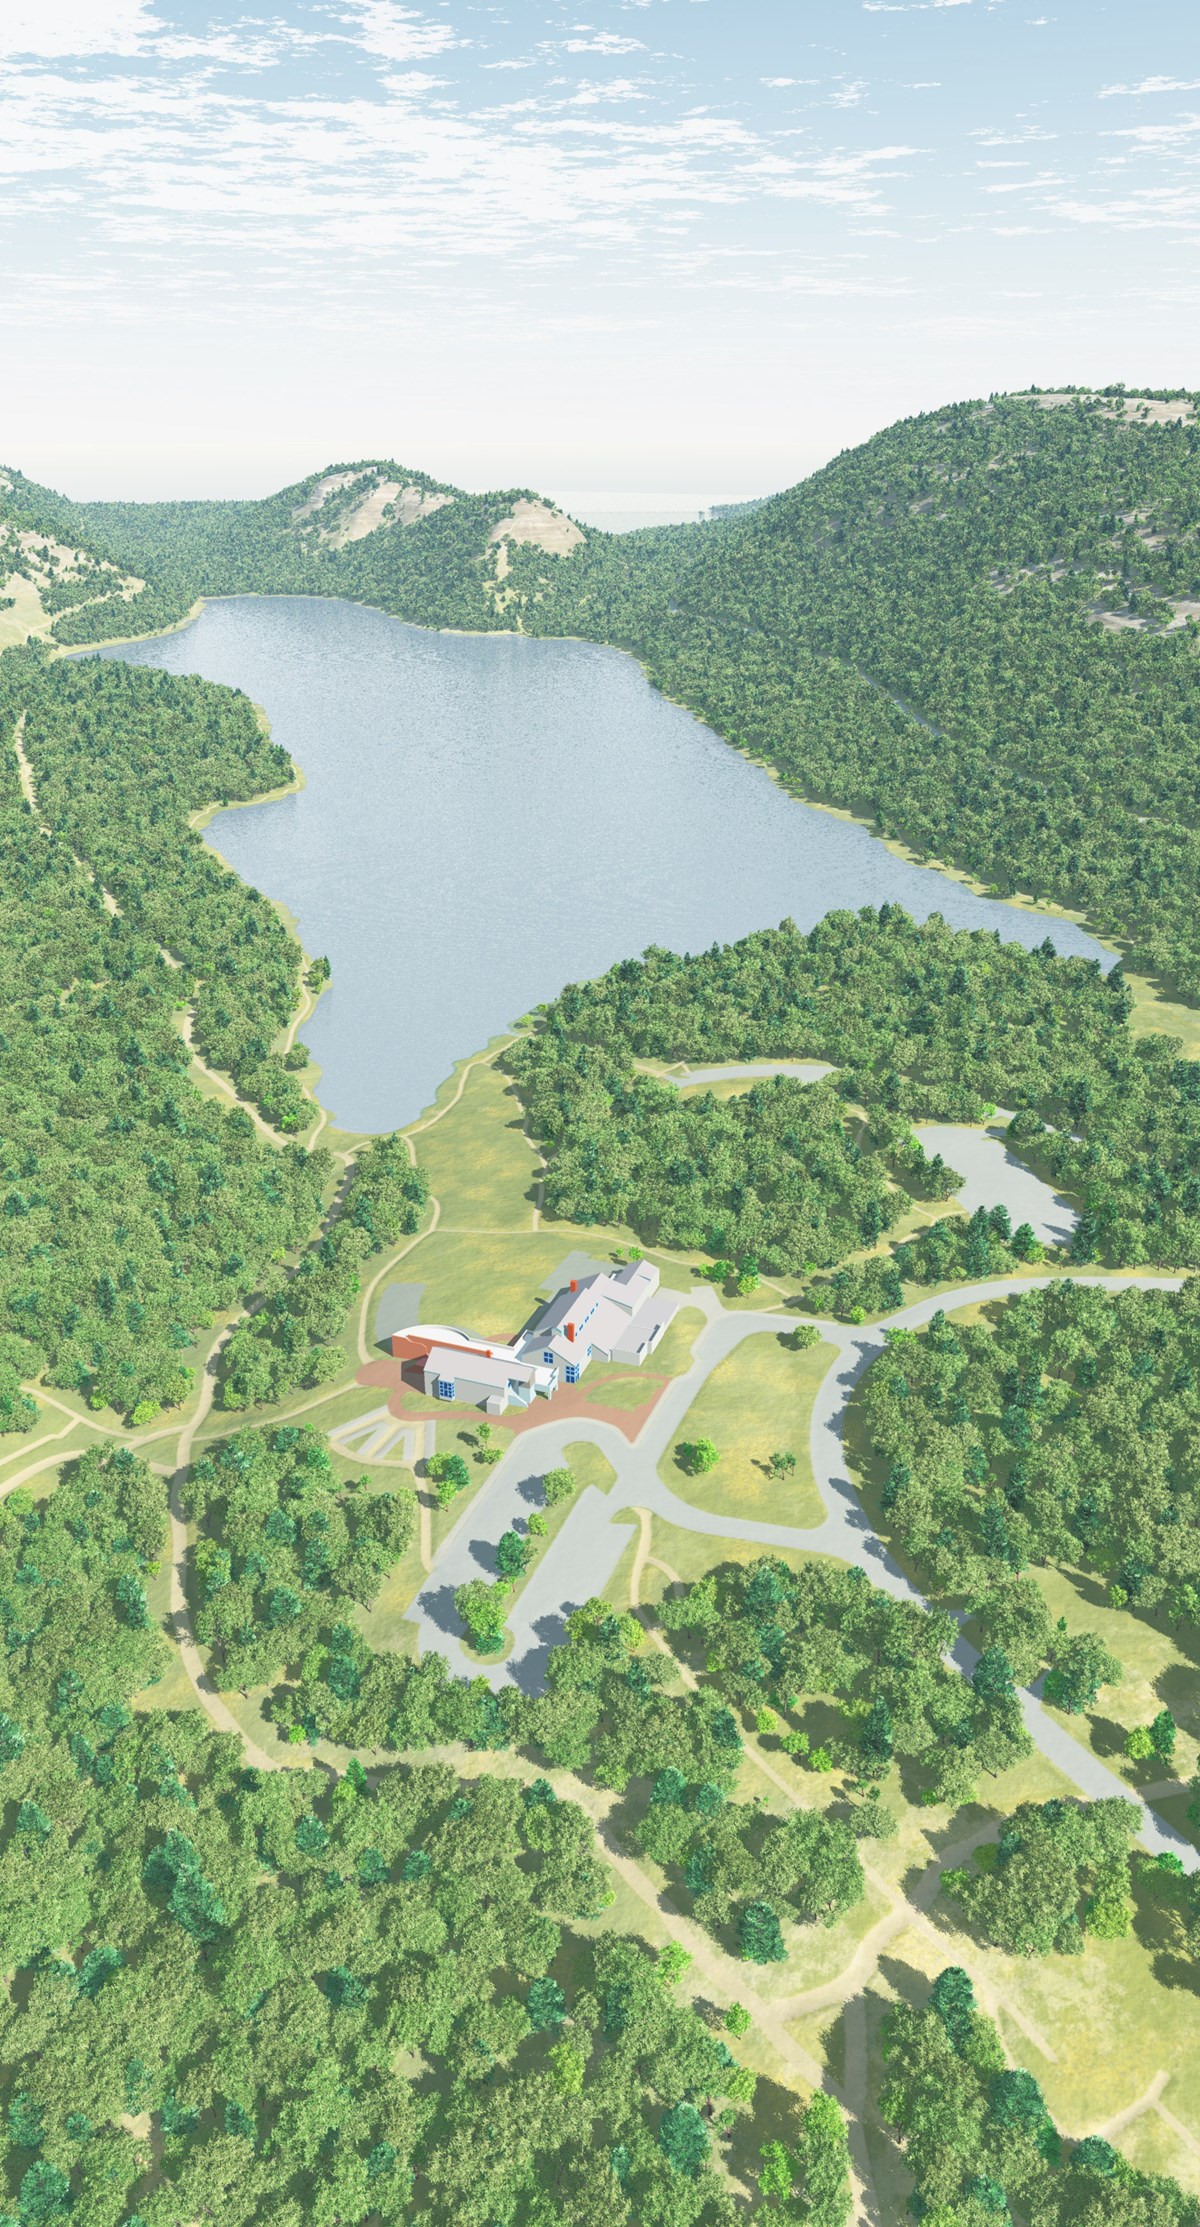 3D Map of Jordan Pond Area (without labels), 2013